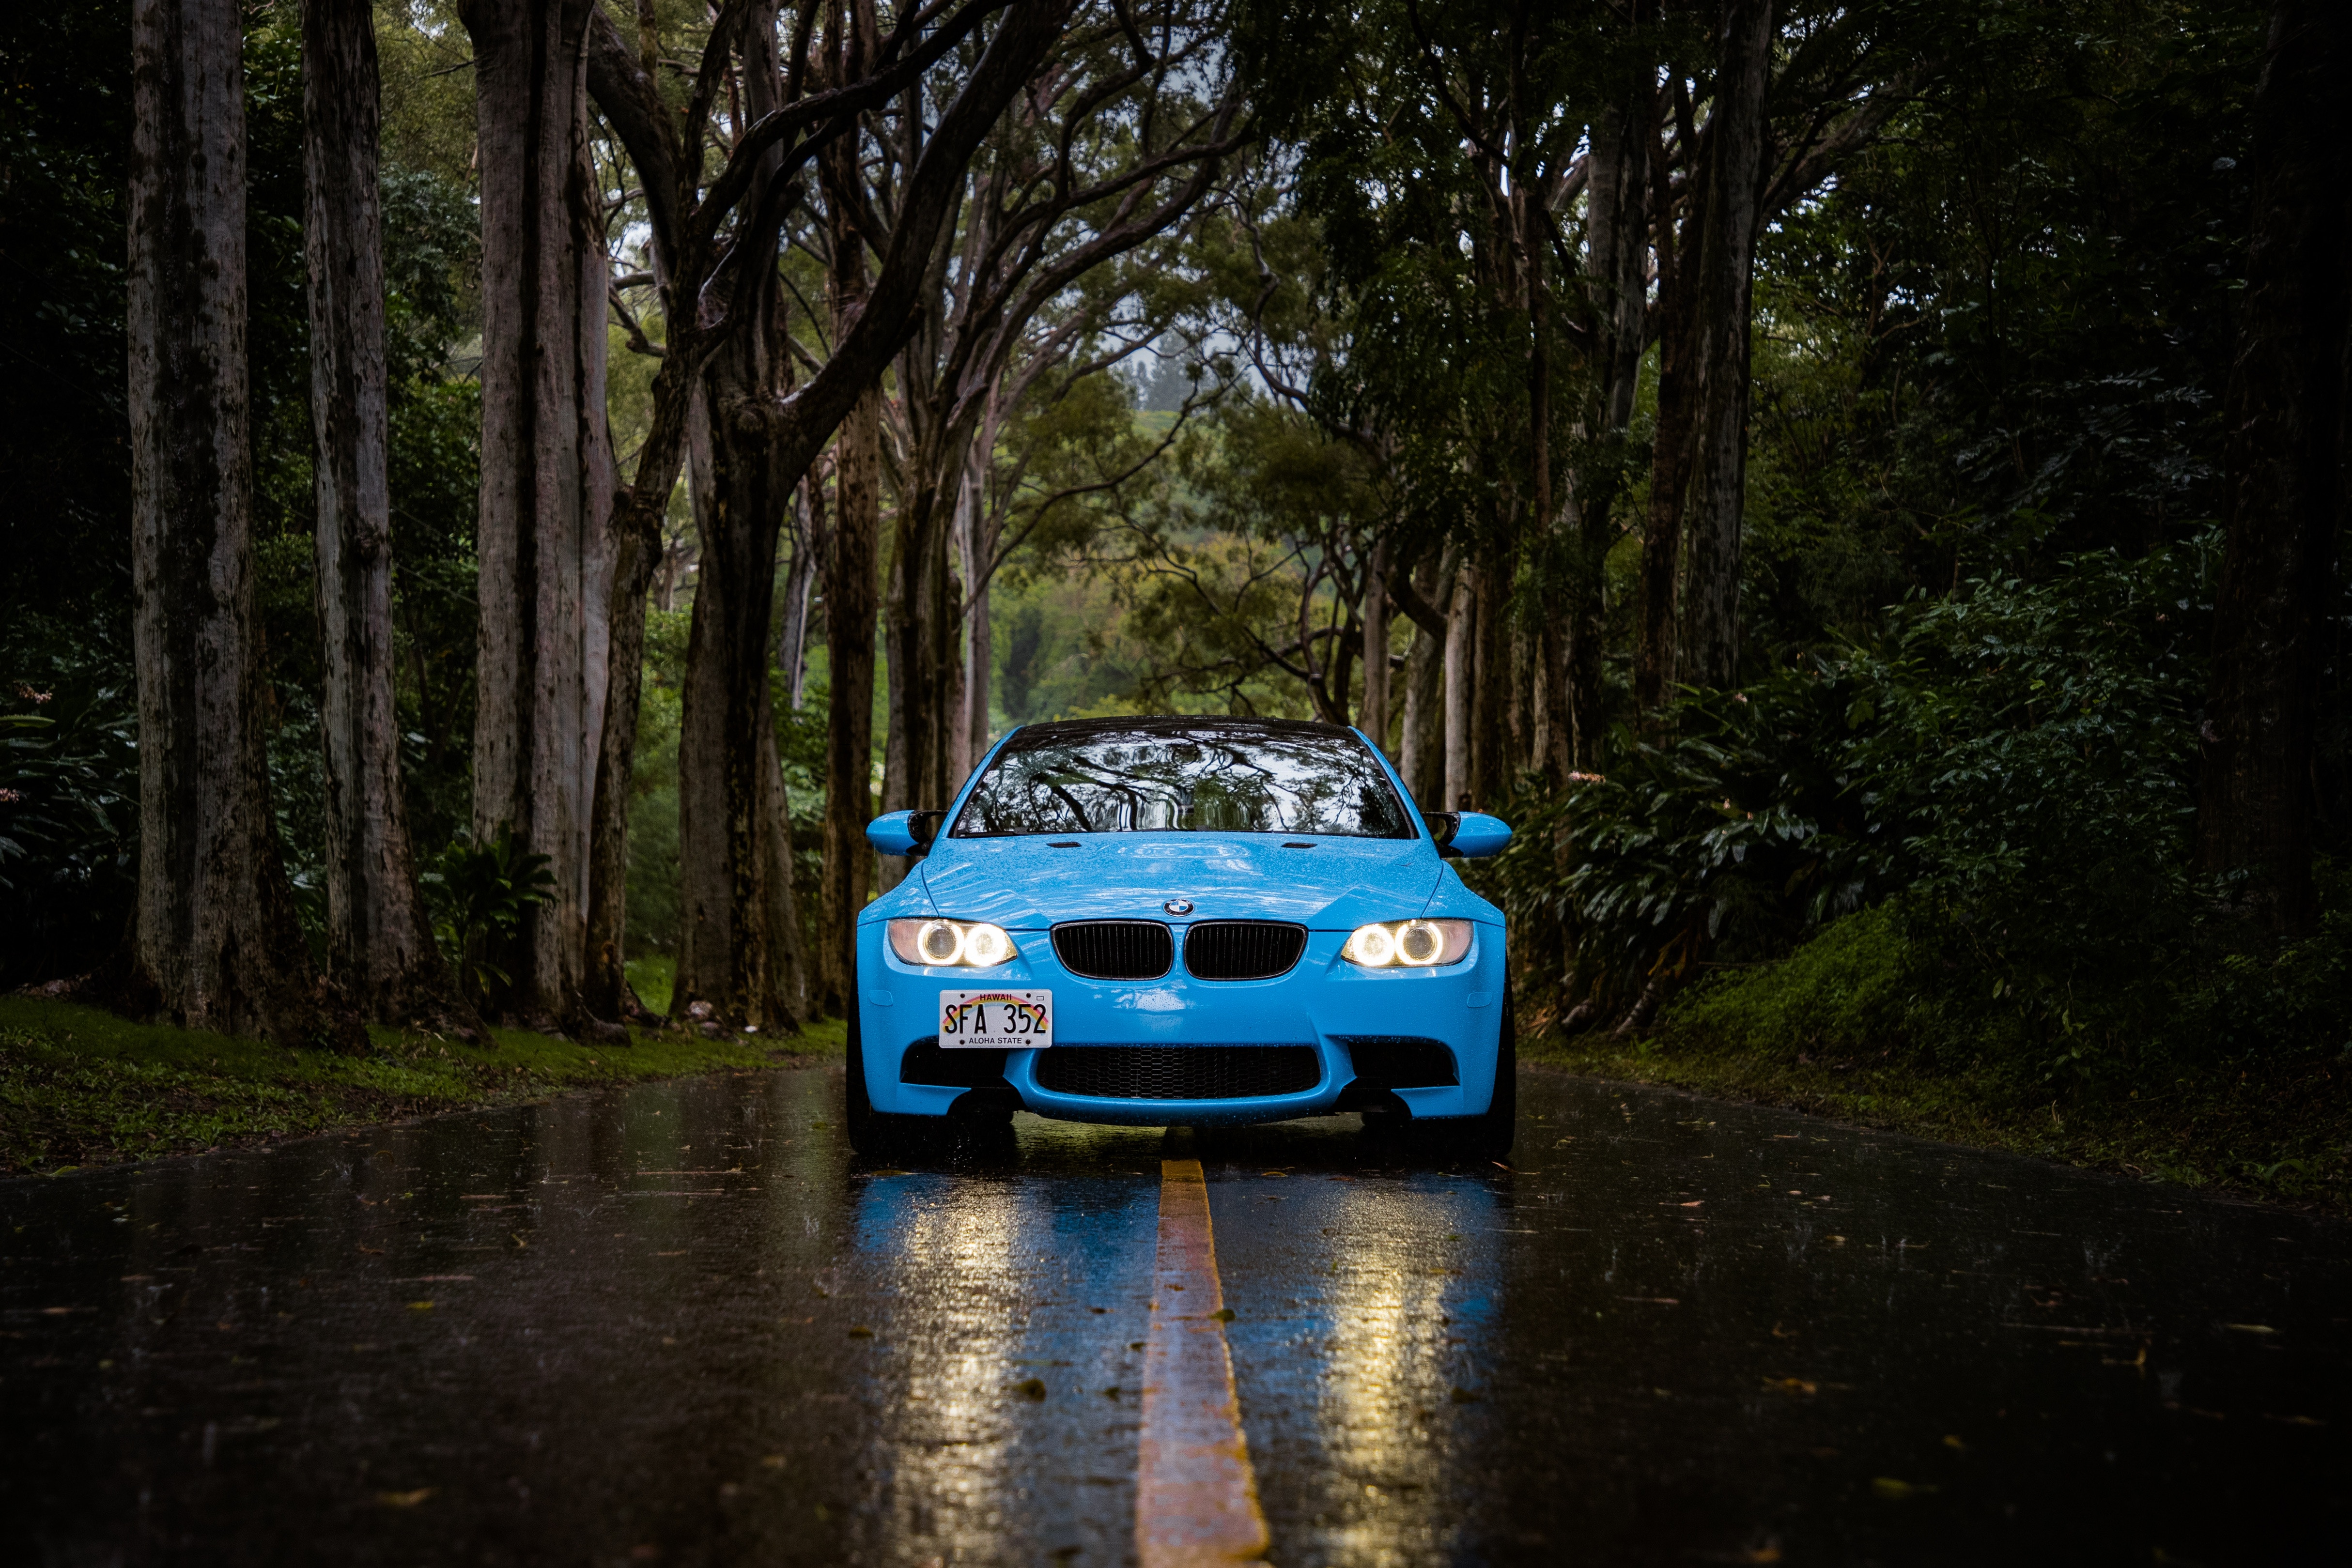 Cool Wallpapers cars, bmw, rain, blue, road, forest, car, front view, bmw 5